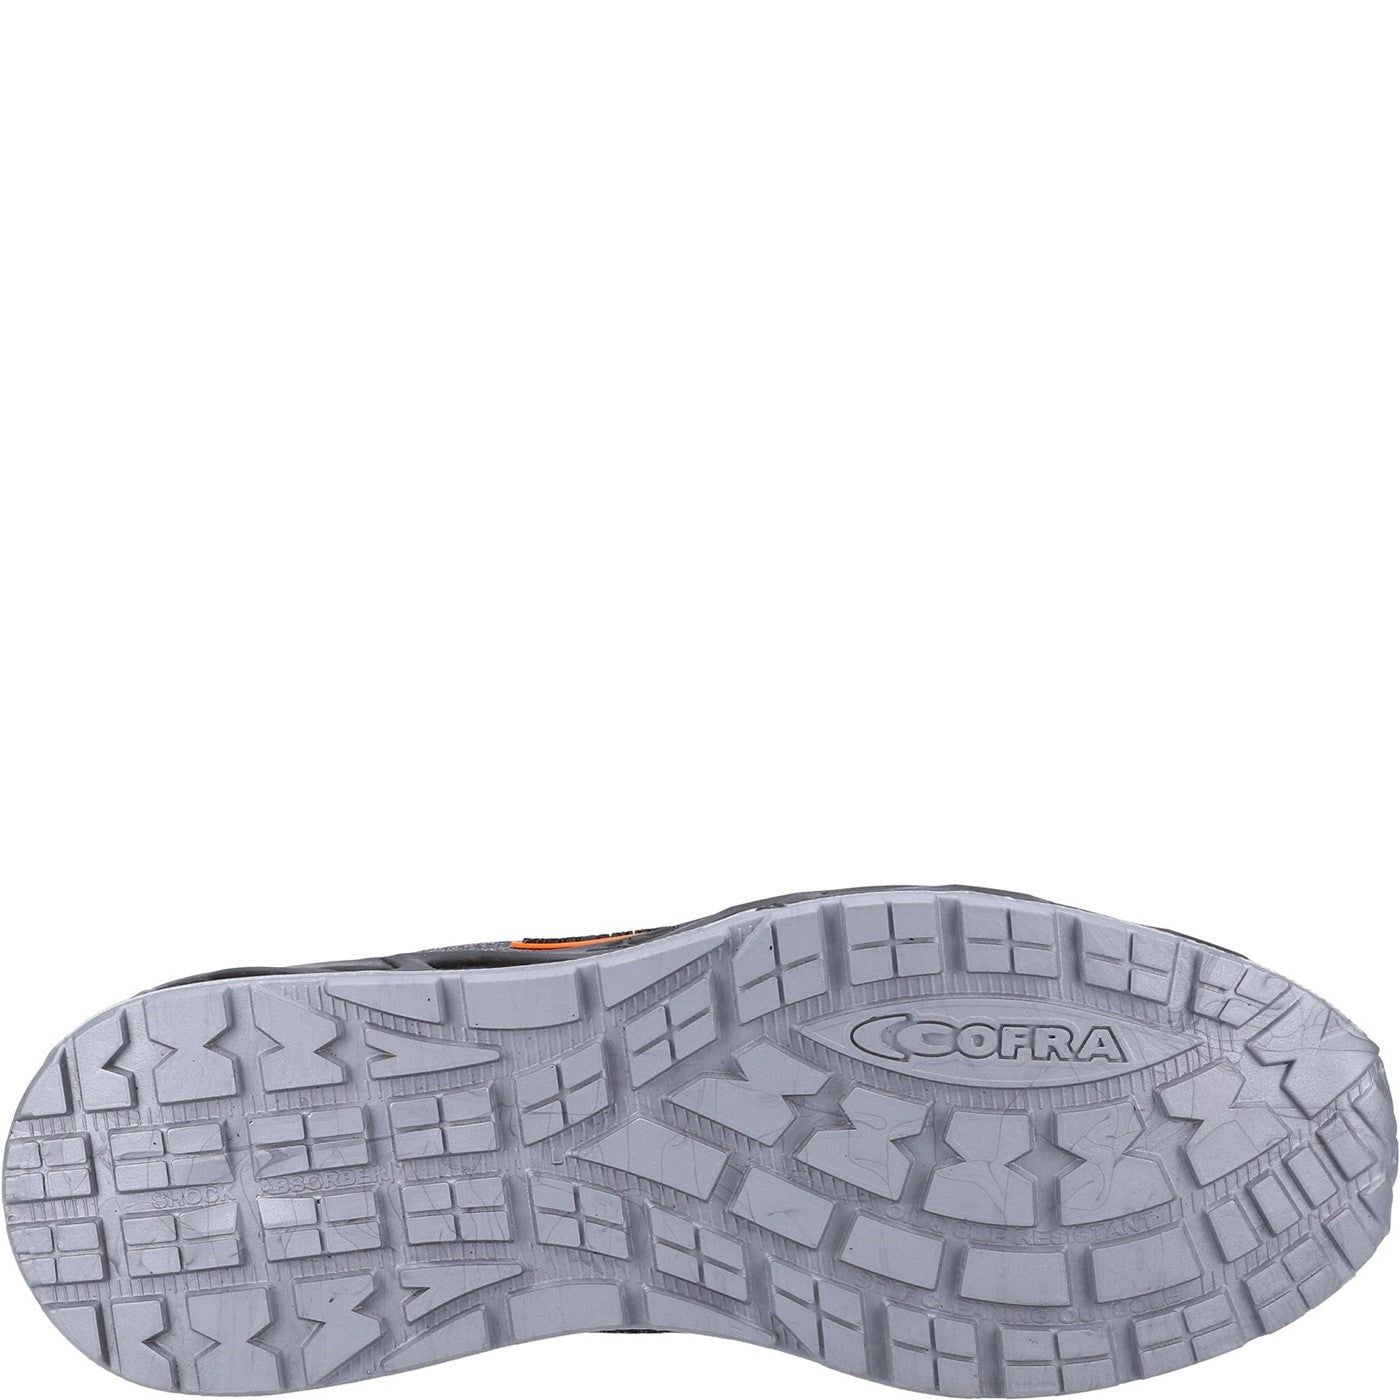 Men's Cofra Reconverted S1P SRC Safety Trainer